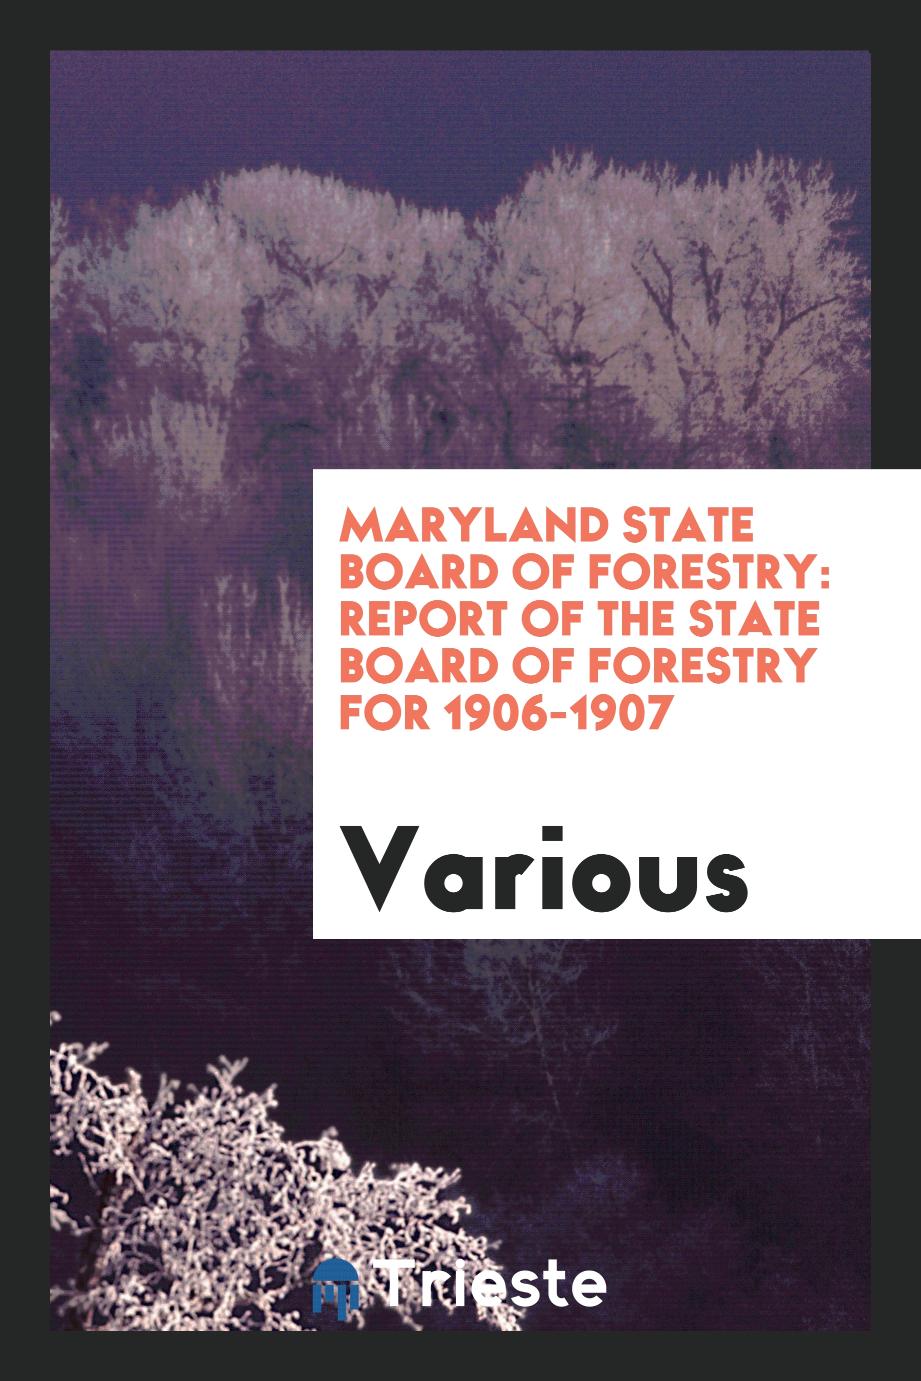 Maryland State Board of Forestry: Report of the State Board of Forestry for 1906-1907